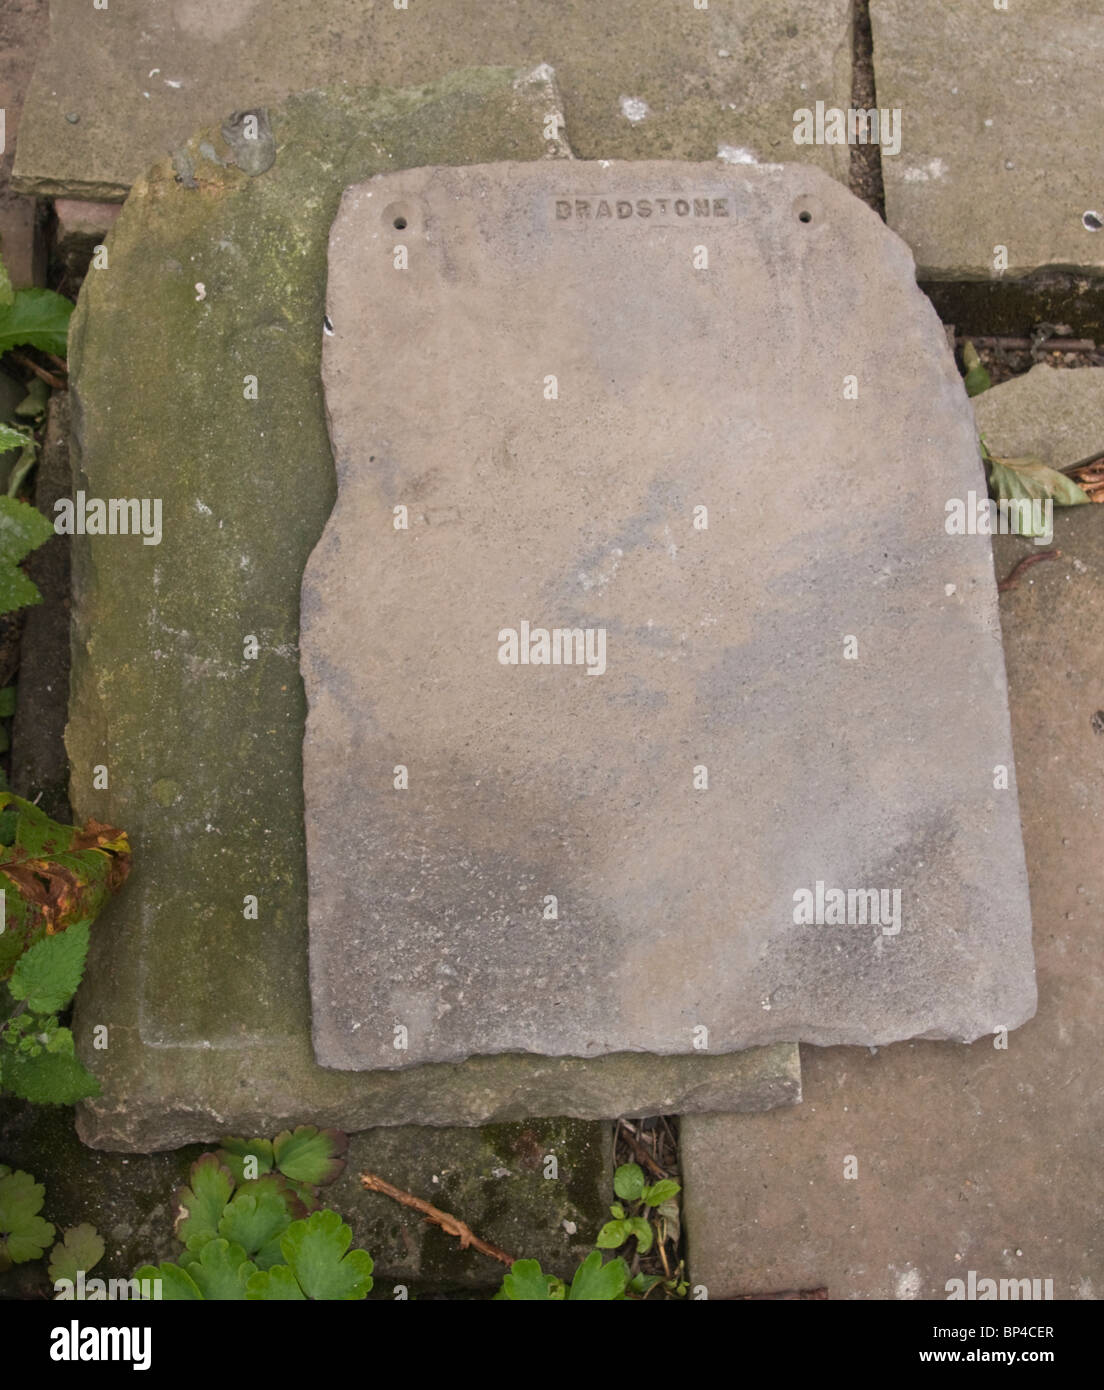 An artificial stone roofing slab (manufactured by Bradstone) sitting on top of a roof slab of natural stone. Stock Photo